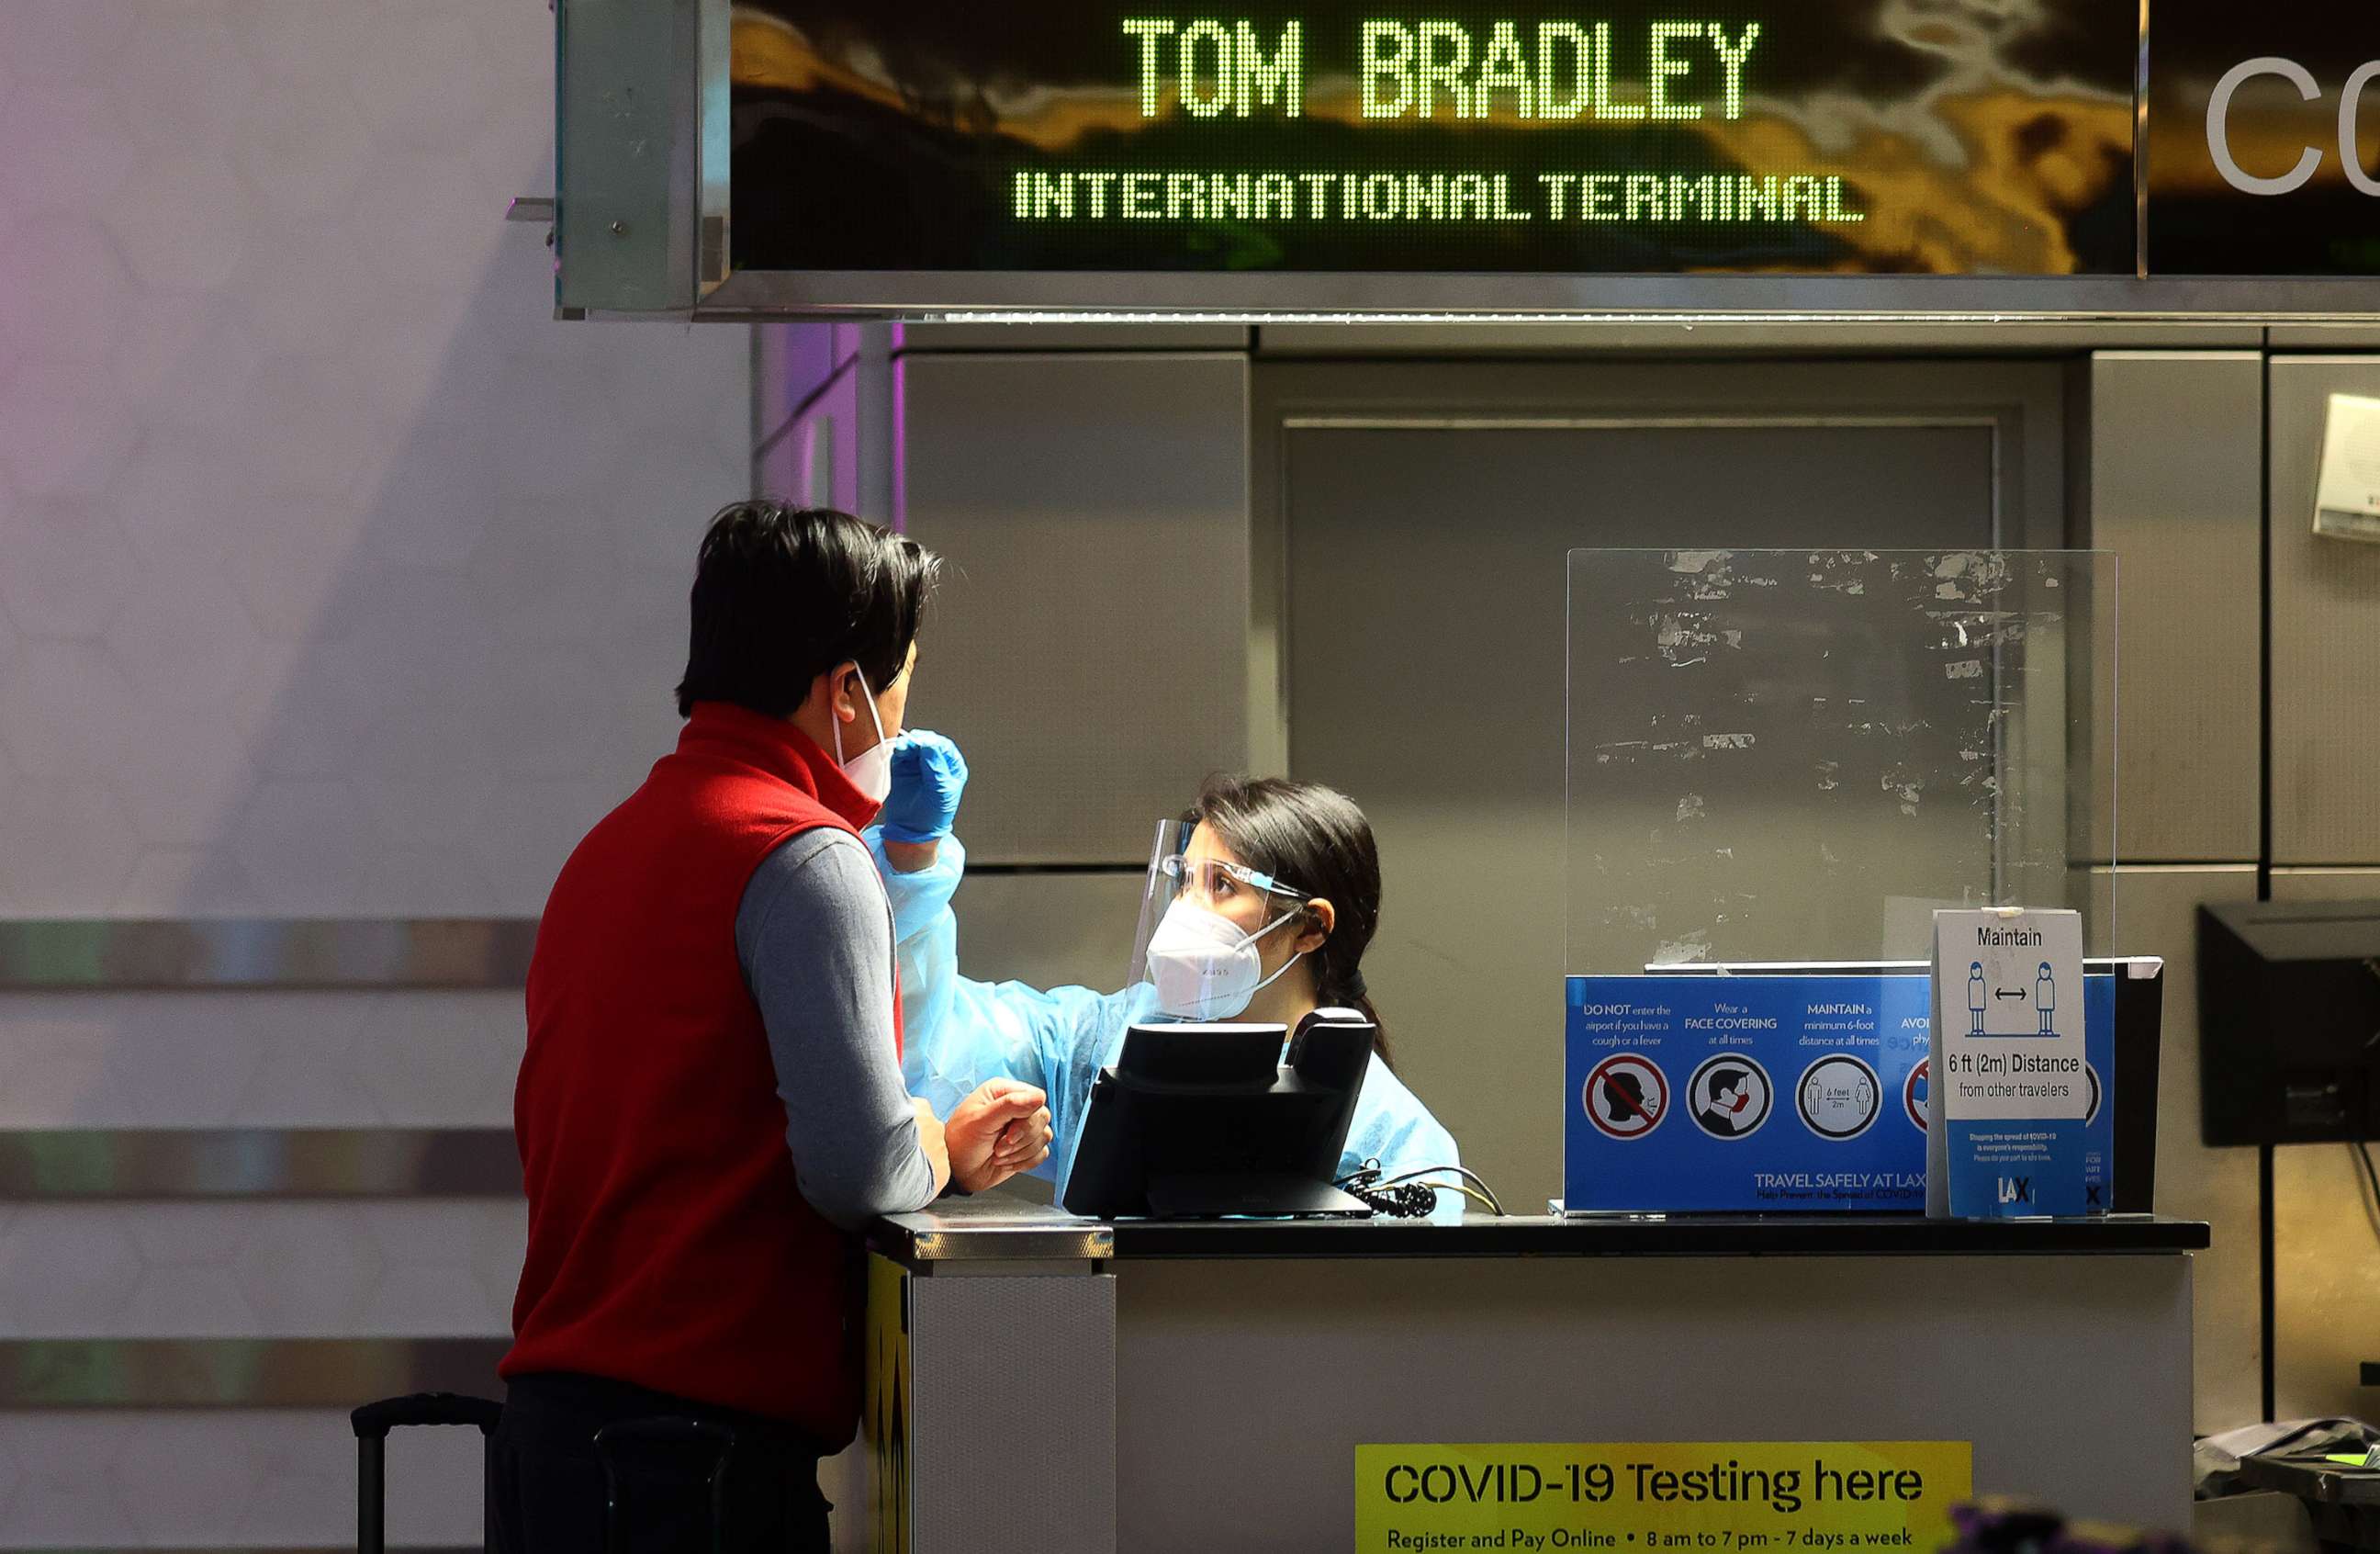 PHOTO: A person is tested for COVID-19 at a test center operating at the Tom Bradley International Terminal of the Los Angeles International Airport, on Dec. 1, 2021 in Los Angeles.